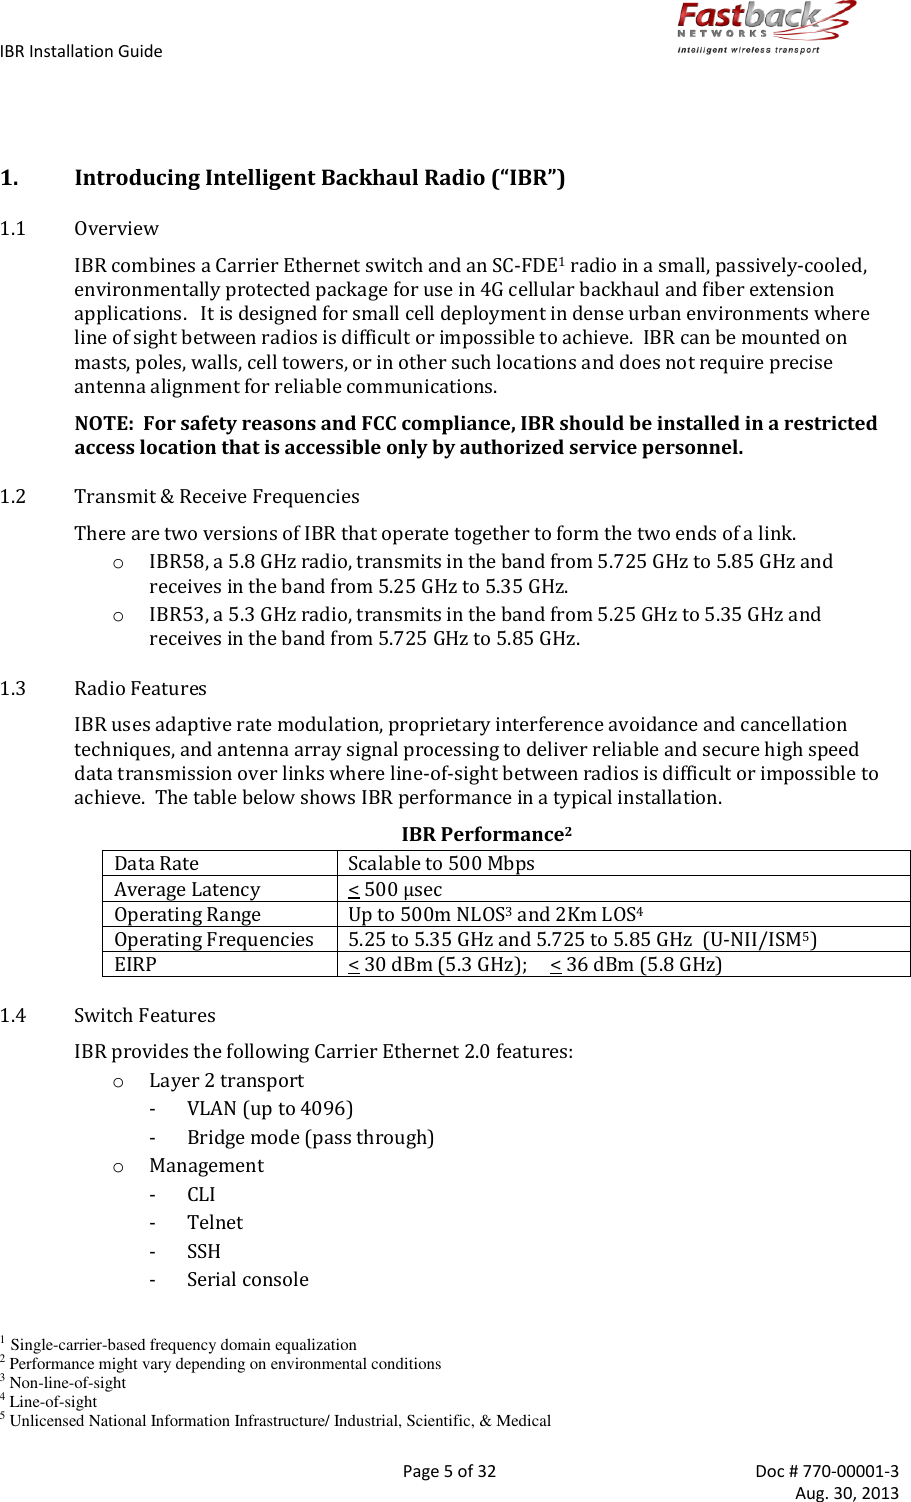 IBR Installation Guide        Page 5 of 32  Doc # 770-00001-3     Aug. 30, 2013    1. Introducing Intelligent Backhaul Radio (“IBR”) 1.1 Overview IBR combines a Carrier Ethernet switch and an SC-FDE1 radio in a small, passively-cooled, environmentally protected package for use in 4G cellular backhaul and fiber extension applications.   It is designed for small cell deployment in dense urban environments where line of sight between radios is difficult or impossible to achieve.  IBR can be mounted on masts, poles, walls, cell towers, or in other such locations and does not require precise antenna alignment for reliable communications. NOTE:  For safety reasons and FCC compliance, IBR should be installed in a restricted access location that is accessible only by authorized service personnel. 1.2 Transmit &amp; Receive Frequencies There are two versions of IBR that operate together to form the two ends of a link. o IBR58, a 5.8 GHz radio, transmits in the band from 5.725 GHz to 5.85 GHz and receives in the band from 5.25 GHz to 5.35 GHz. o IBR53, a 5.3 GHz radio, transmits in the band from 5.25 GHz to 5.35 GHz and receives in the band from 5.725 GHz to 5.85 GHz. 1.3 Radio Features IBR uses adaptive rate modulation, proprietary interference avoidance and cancellation techniques, and antenna array signal processing to deliver reliable and secure high speed data transmission over links where line-of-sight between radios is difficult or impossible to achieve.  The table below shows IBR performance in a typical installation. IBR Performance2 Data Rate Scalable to 500 Mbps Average Latency &lt; 500 μsec Operating Range Up to 500m NLOS3 and 2Km LOS4 Operating Frequencies 5.25 to 5.35 GHz and 5.725 to 5.85 GHz  (U-NII/ISM5) EIRP &lt; 30 dBm (5.3 GHz);     &lt; 36 dBm (5.8 GHz) 1.4 Switch Features IBR provides the following Carrier Ethernet 2.0 features: o Layer 2 transport - VLAN (up to 4096) - Bridge mode (pass through) o Management - CLI - Telnet - SSH - Serial console  1 Single-carrier-based frequency domain equalization 2 Performance might vary depending on environmental conditions 3 Non-line-of-sight 4 Line-of-sight 5 Unlicensed National Information Infrastructure/ Industrial, Scientific, &amp; Medical 